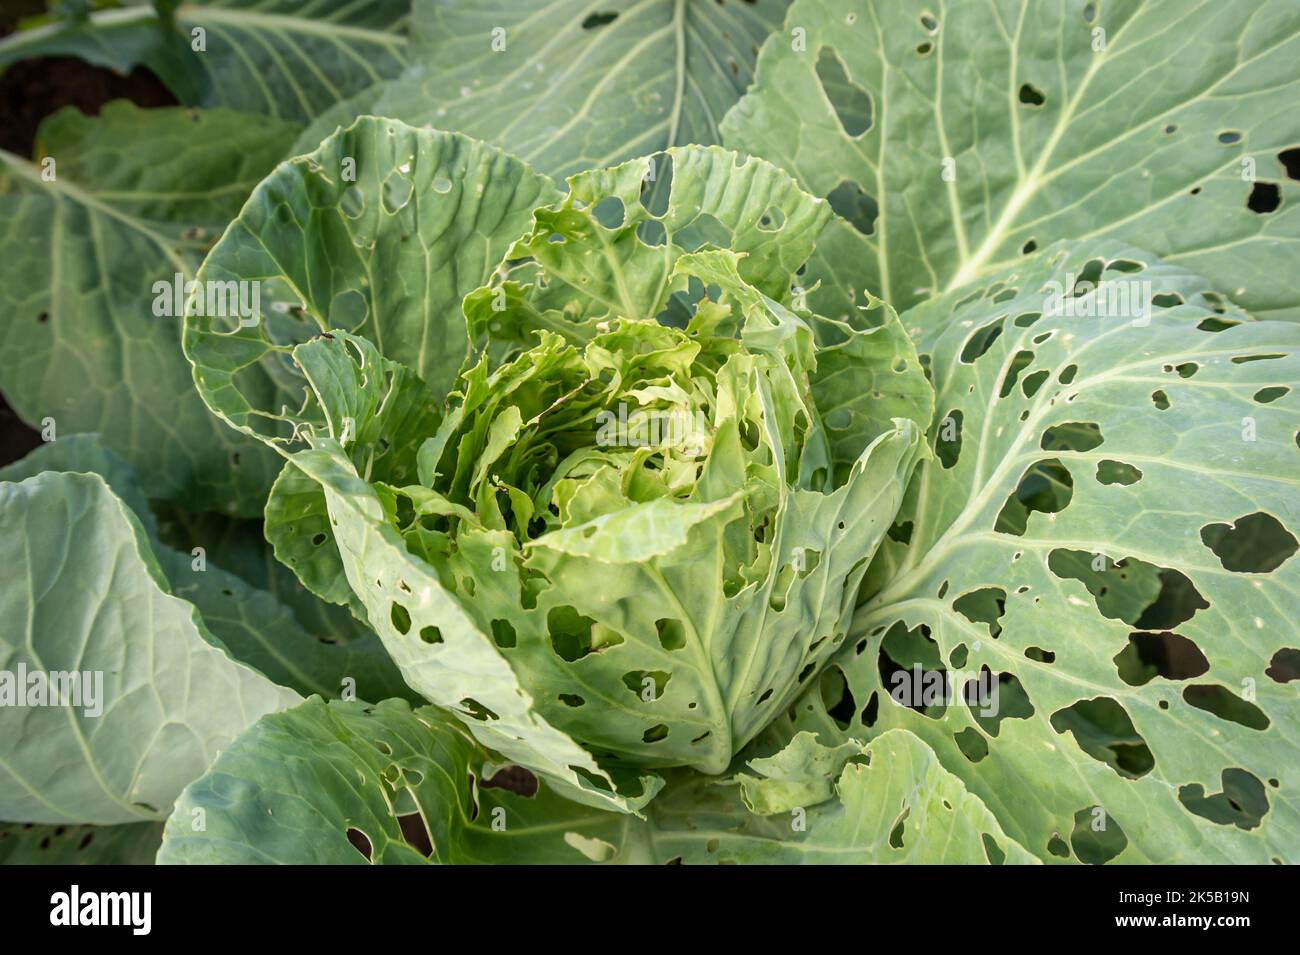 Cabbage eaten by caterpillars in the garden close-up. Damaged white cabbage leaves in holes. Stock Photo